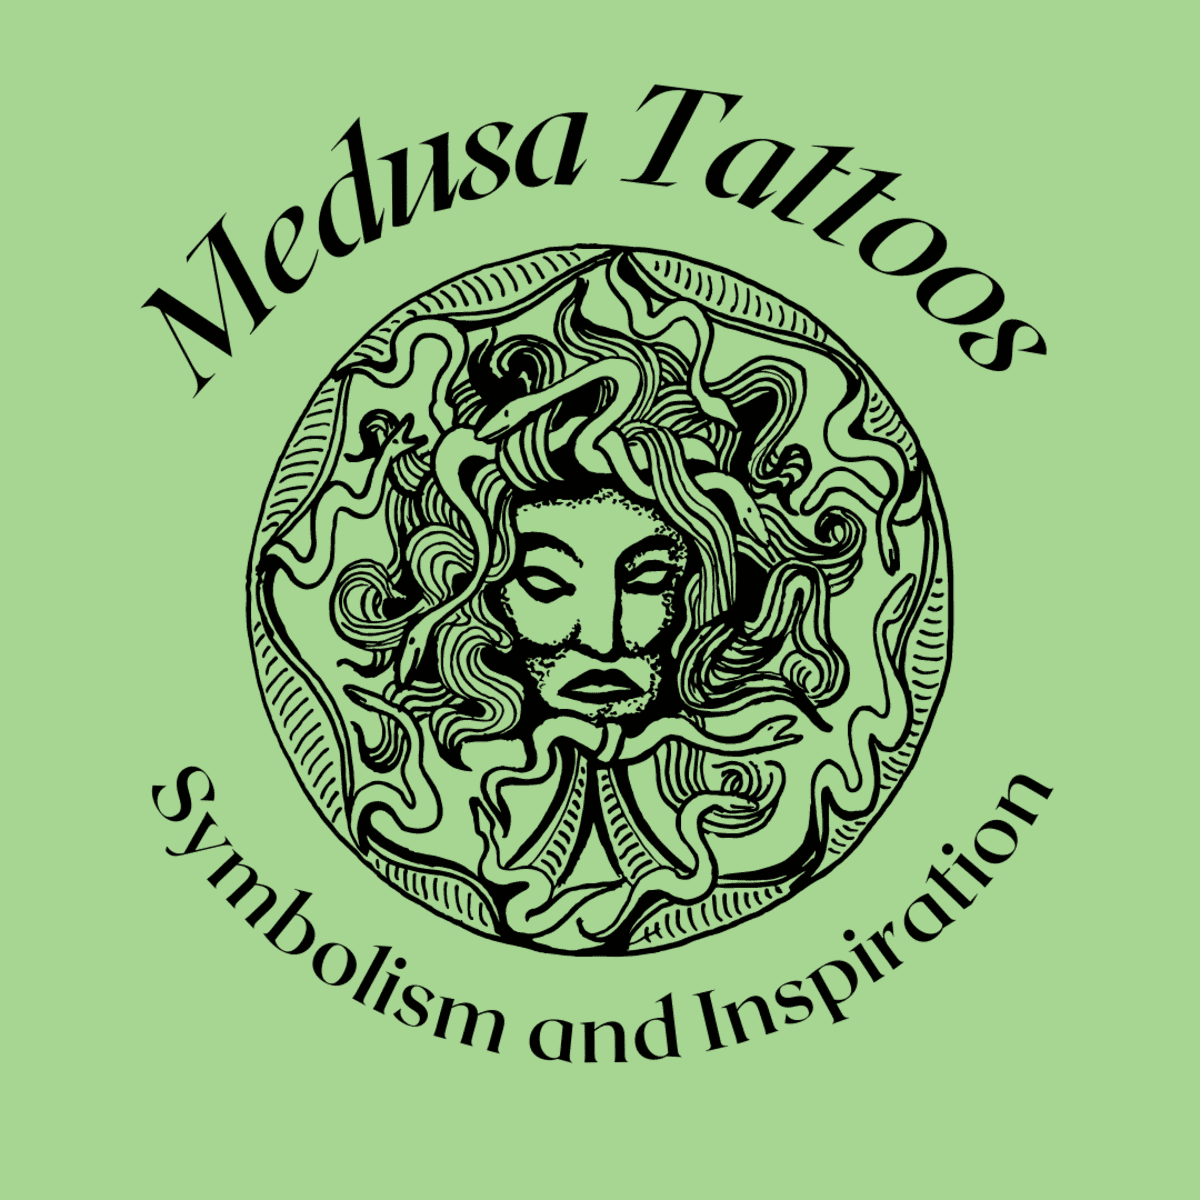 The Medusa Tattoo: Designs and Meanings - The Skull and Sword